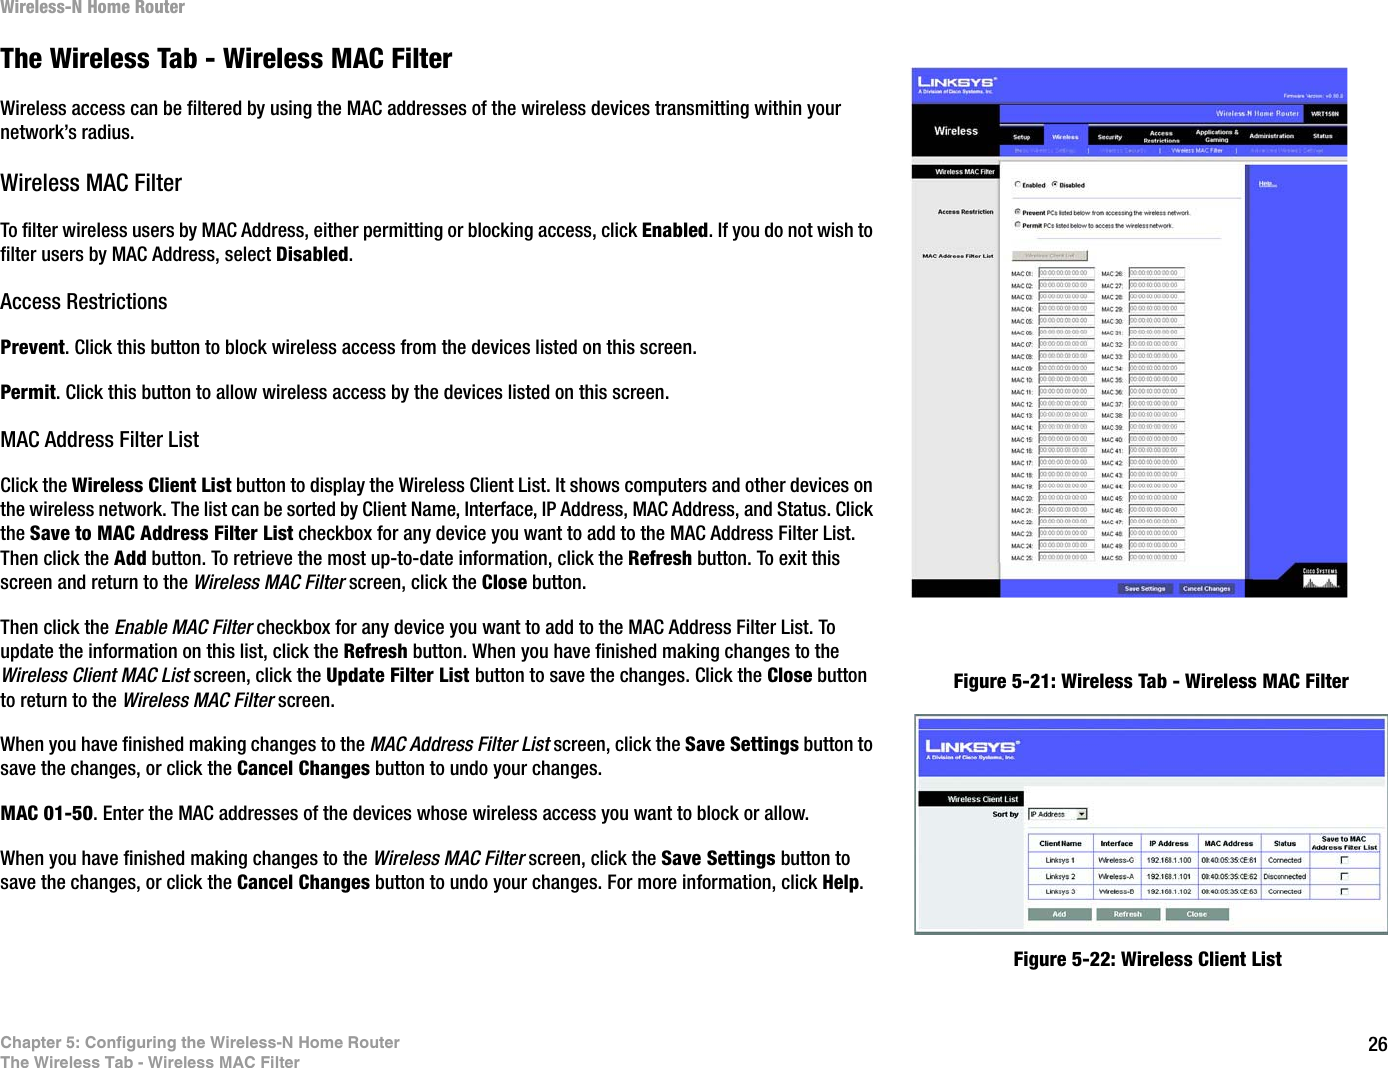 26Chapter 5: Configuring the Wireless-N Home RouterThe Wireless Tab - Wireless MAC FilterWireless-N Home RouterThe Wireless Tab - Wireless MAC FilterWireless access can be filtered by using the MAC addresses of the wireless devices transmitting within your network’s radius.Wireless MAC FilterTo filter wireless users by MAC Address, either permitting or blocking access, click Enabled. If you do not wish to filter users by MAC Address, select Disabled.Access RestrictionsPrevent. Click this button to block wireless access from the devices listed on this screen.Permit. Click this button to allow wireless access by the devices listed on this screen.MAC Address Filter ListClick the Wireless Client List button to display the Wireless Client List. It shows computers and other devices on the wireless network. The list can be sorted by Client Name, Interface, IP Address, MAC Address, and Status. Click the Save to MAC Address Filter List checkbox for any device you want to add to the MAC Address Filter List. Then click the Add button. To retrieve the most up-to-date information, click the Refresh button. To exit this screen and return to the Wireless MAC Filter screen, click the Close button.Then click the Enable MAC Filter checkbox for any device you want to add to the MAC Address Filter List. To update the information on this list, click the Refresh button. When you have finished making changes to the Wireless Client MAC List screen, click the Update Filter List button to save the changes. Click the Close button to return to the Wireless MAC Filter screen.When you have finished making changes to the MAC Address Filter List screen, click the Save Settings button to save the changes, or click the Cancel Changes button to undo your changes. MAC 01-50. Enter the MAC addresses of the devices whose wireless access you want to block or allow.When you have finished making changes to the Wireless MAC Filter screen, click the Save Settings button to save the changes, or click the Cancel Changes button to undo your changes. For more information, click Help.Figure 5-21: Wireless Tab - Wireless MAC FilterFigure 5-22: Wireless Client List